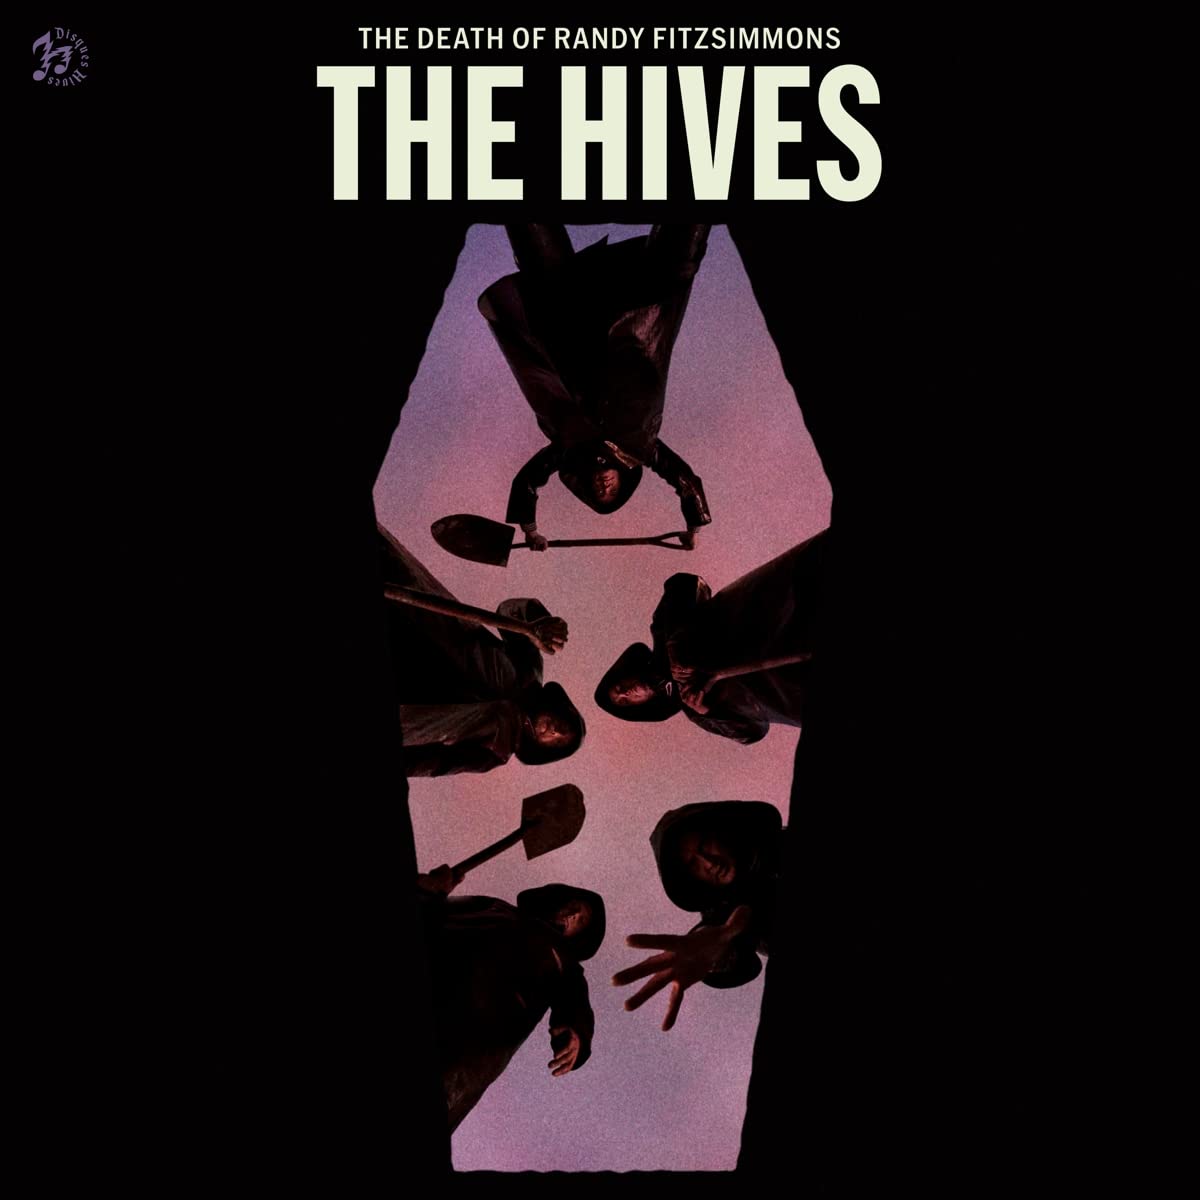 The Hives ‎– The Death Of Randy Fitzsimmons